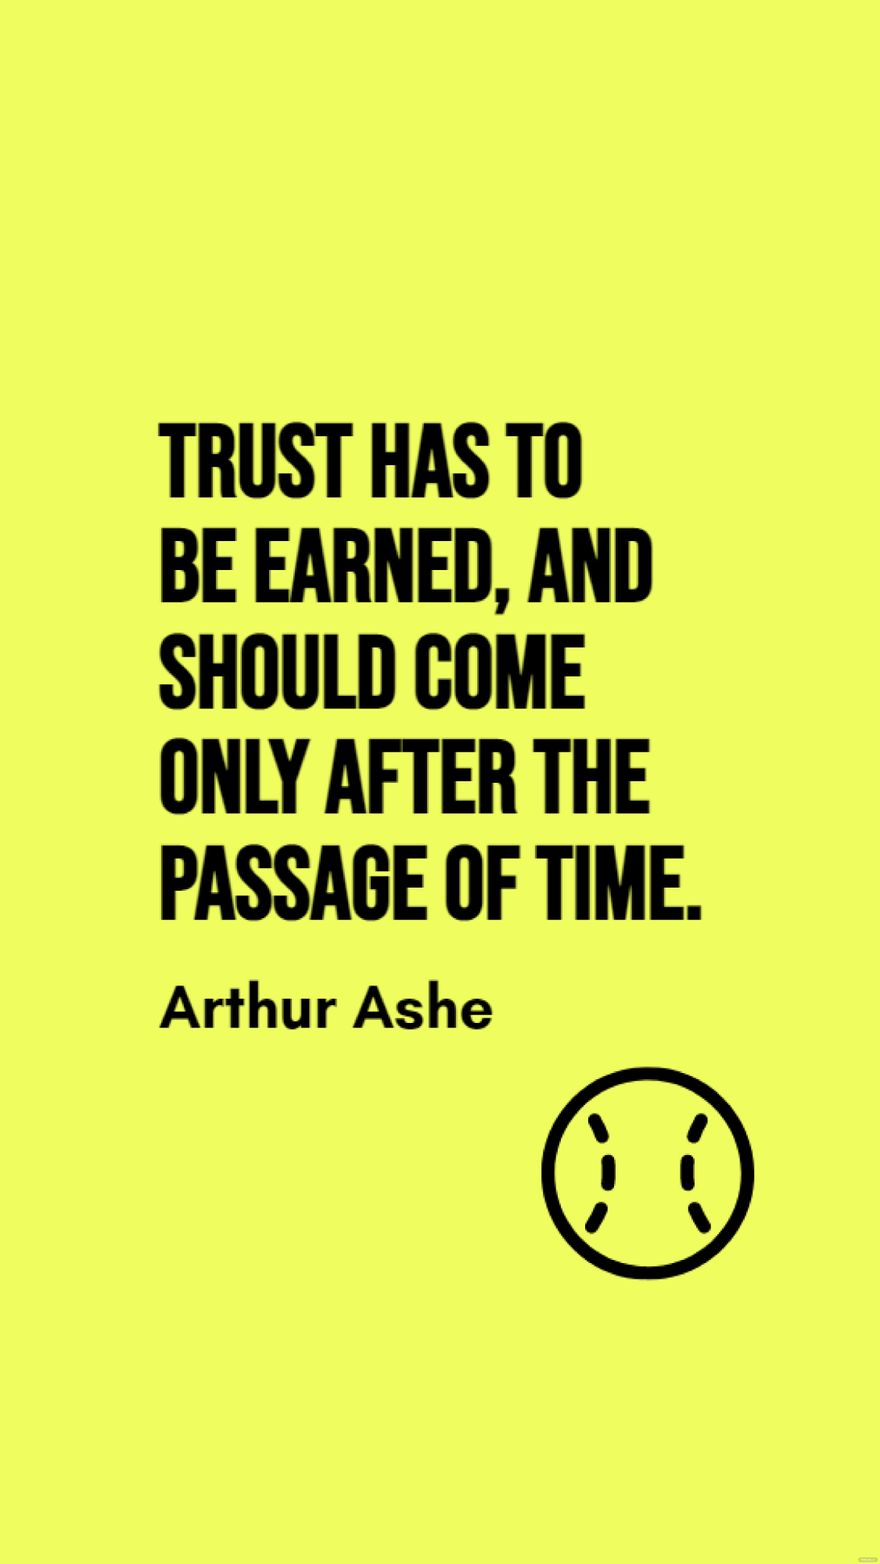 Arthur Ashe - Trust has to be earned, and should come only after the passage of time. in JPG